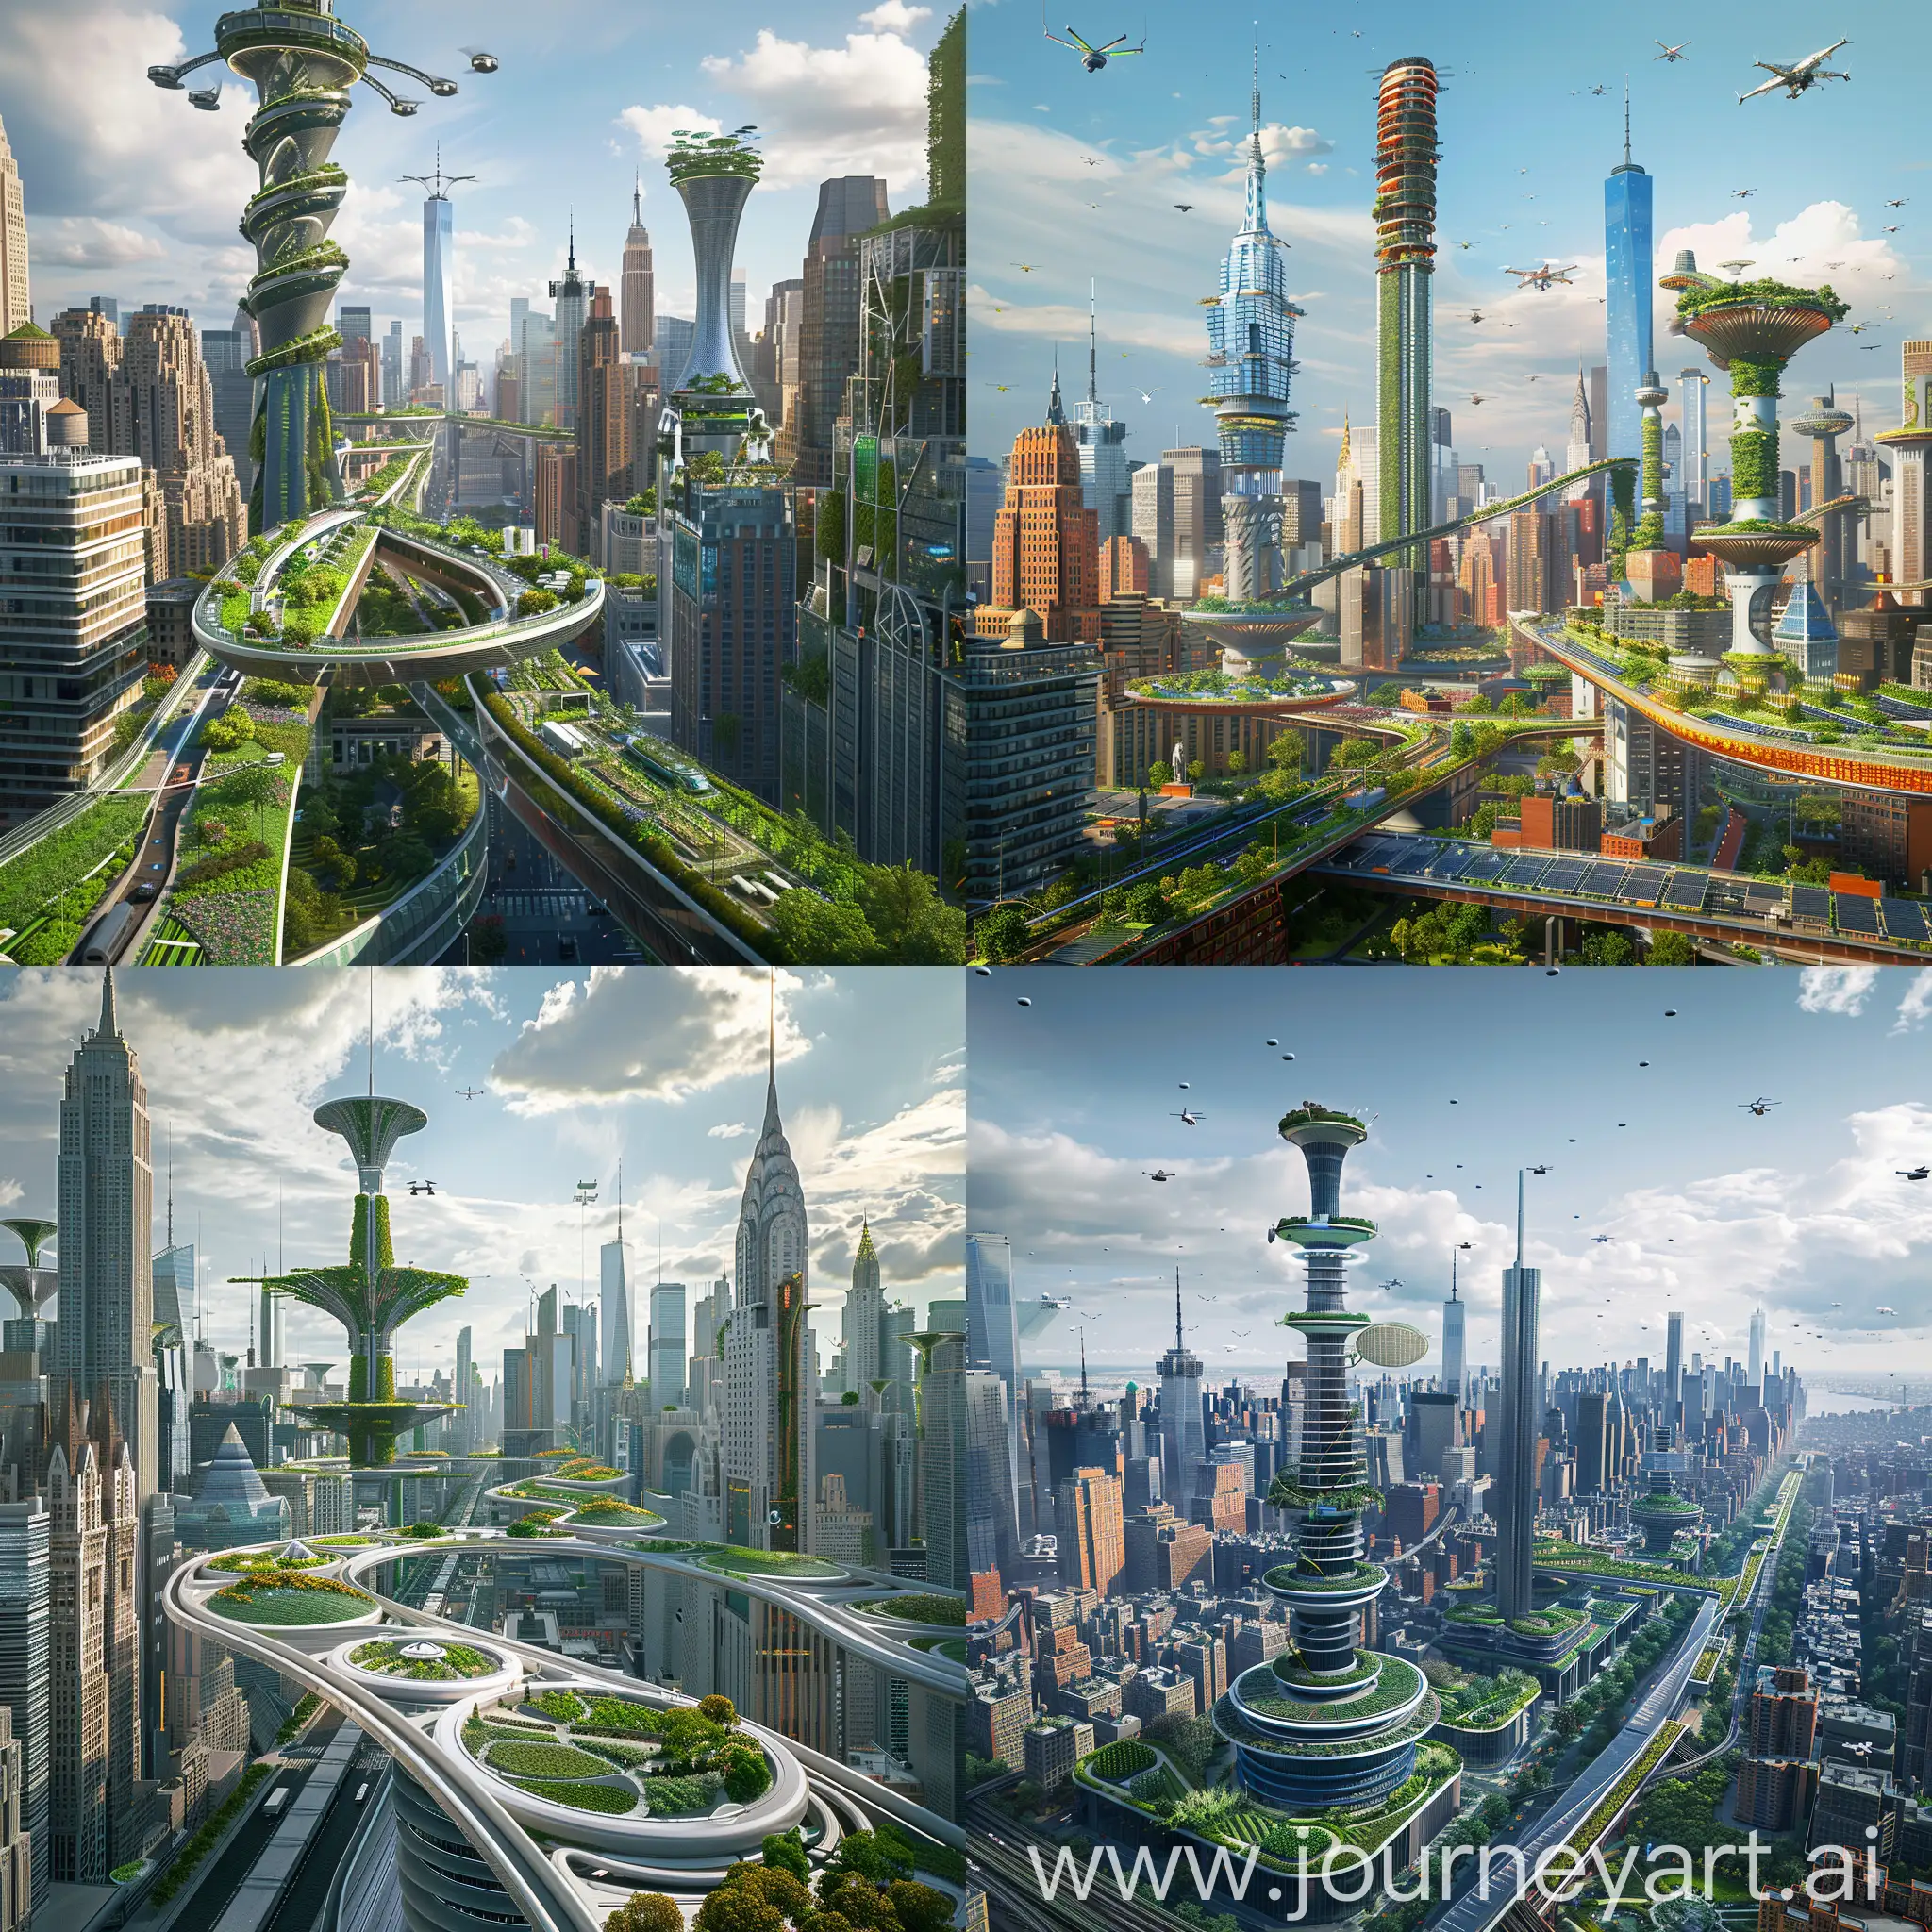 Futuristic-New-York-City-Utopian-Information-Age-and-Sustainable-Urban-Infrastructure